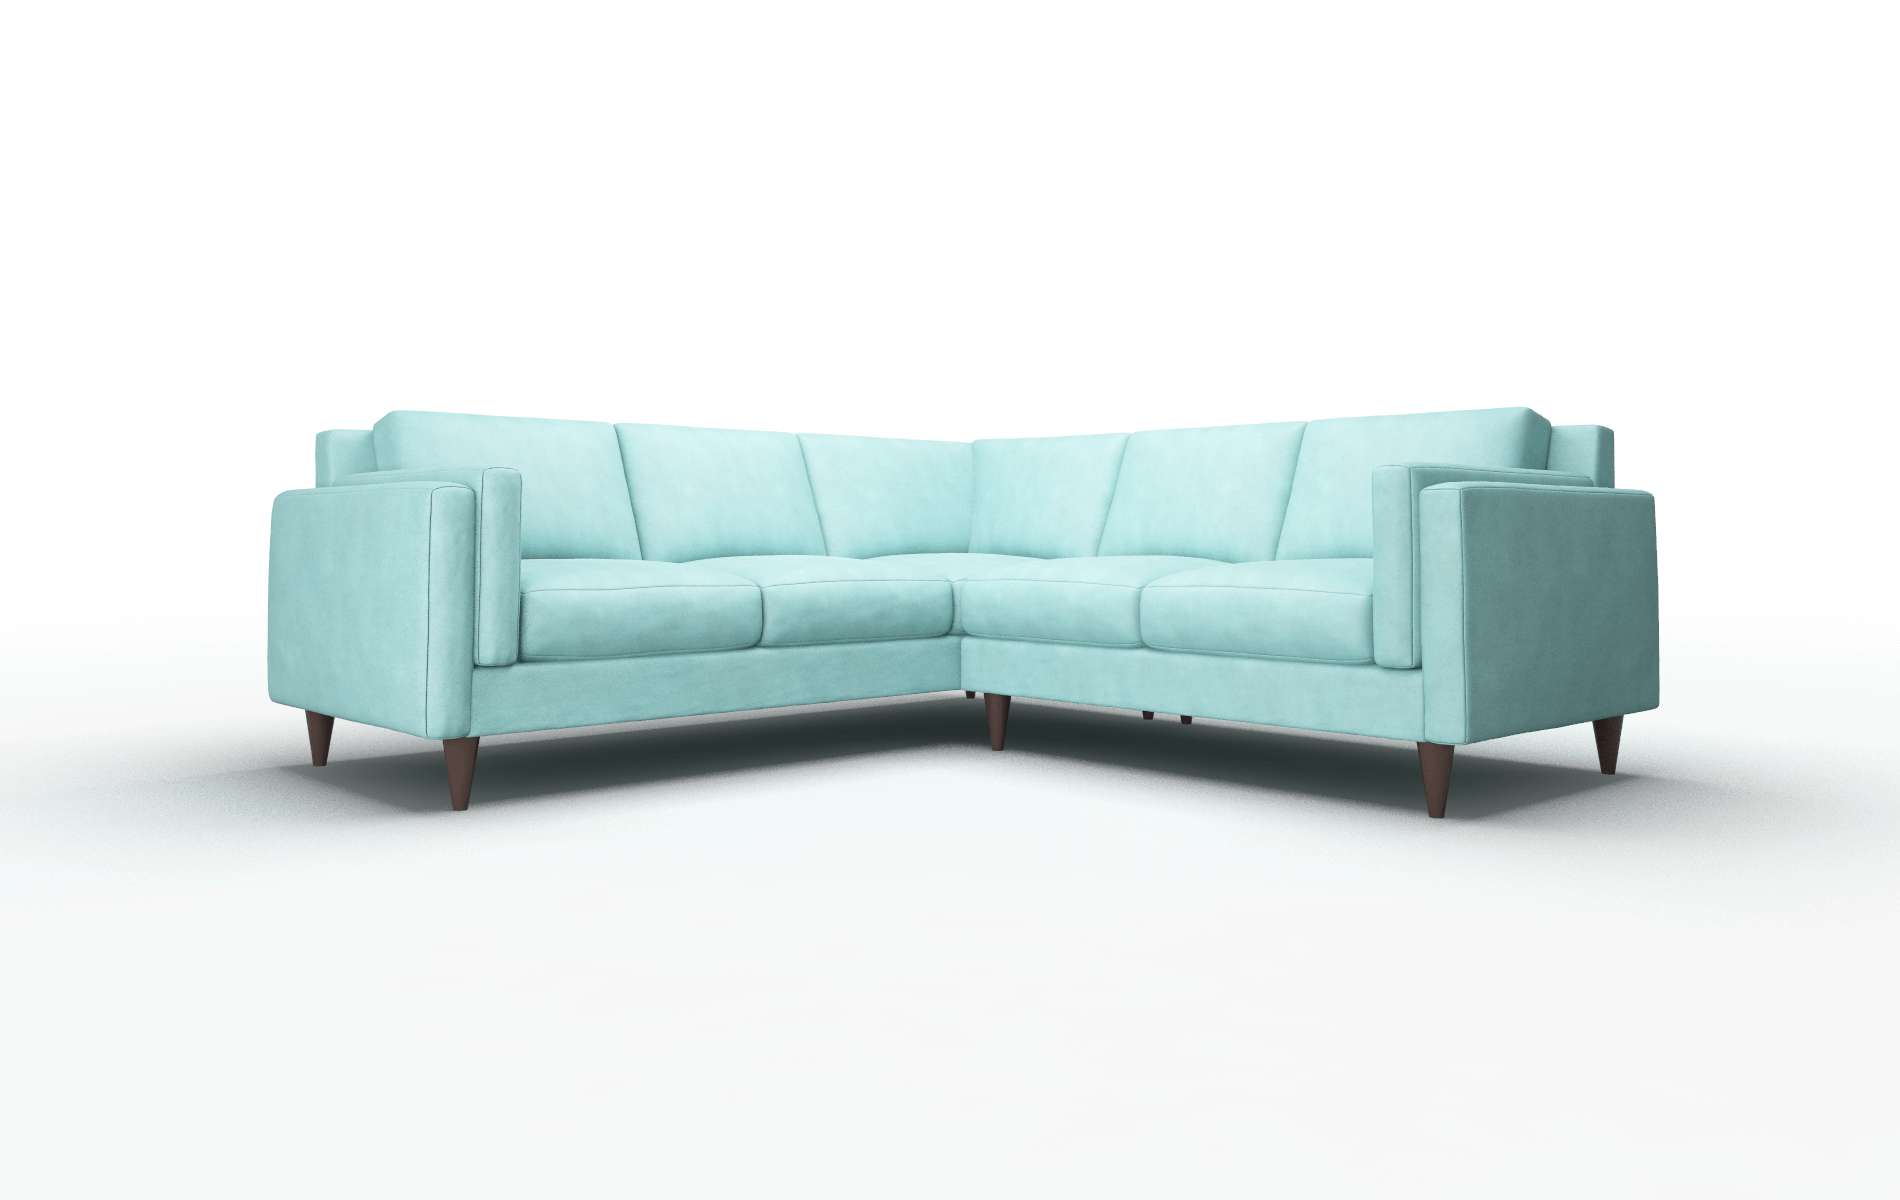 Helsinki Curious Turquoise Sectional espresso legs